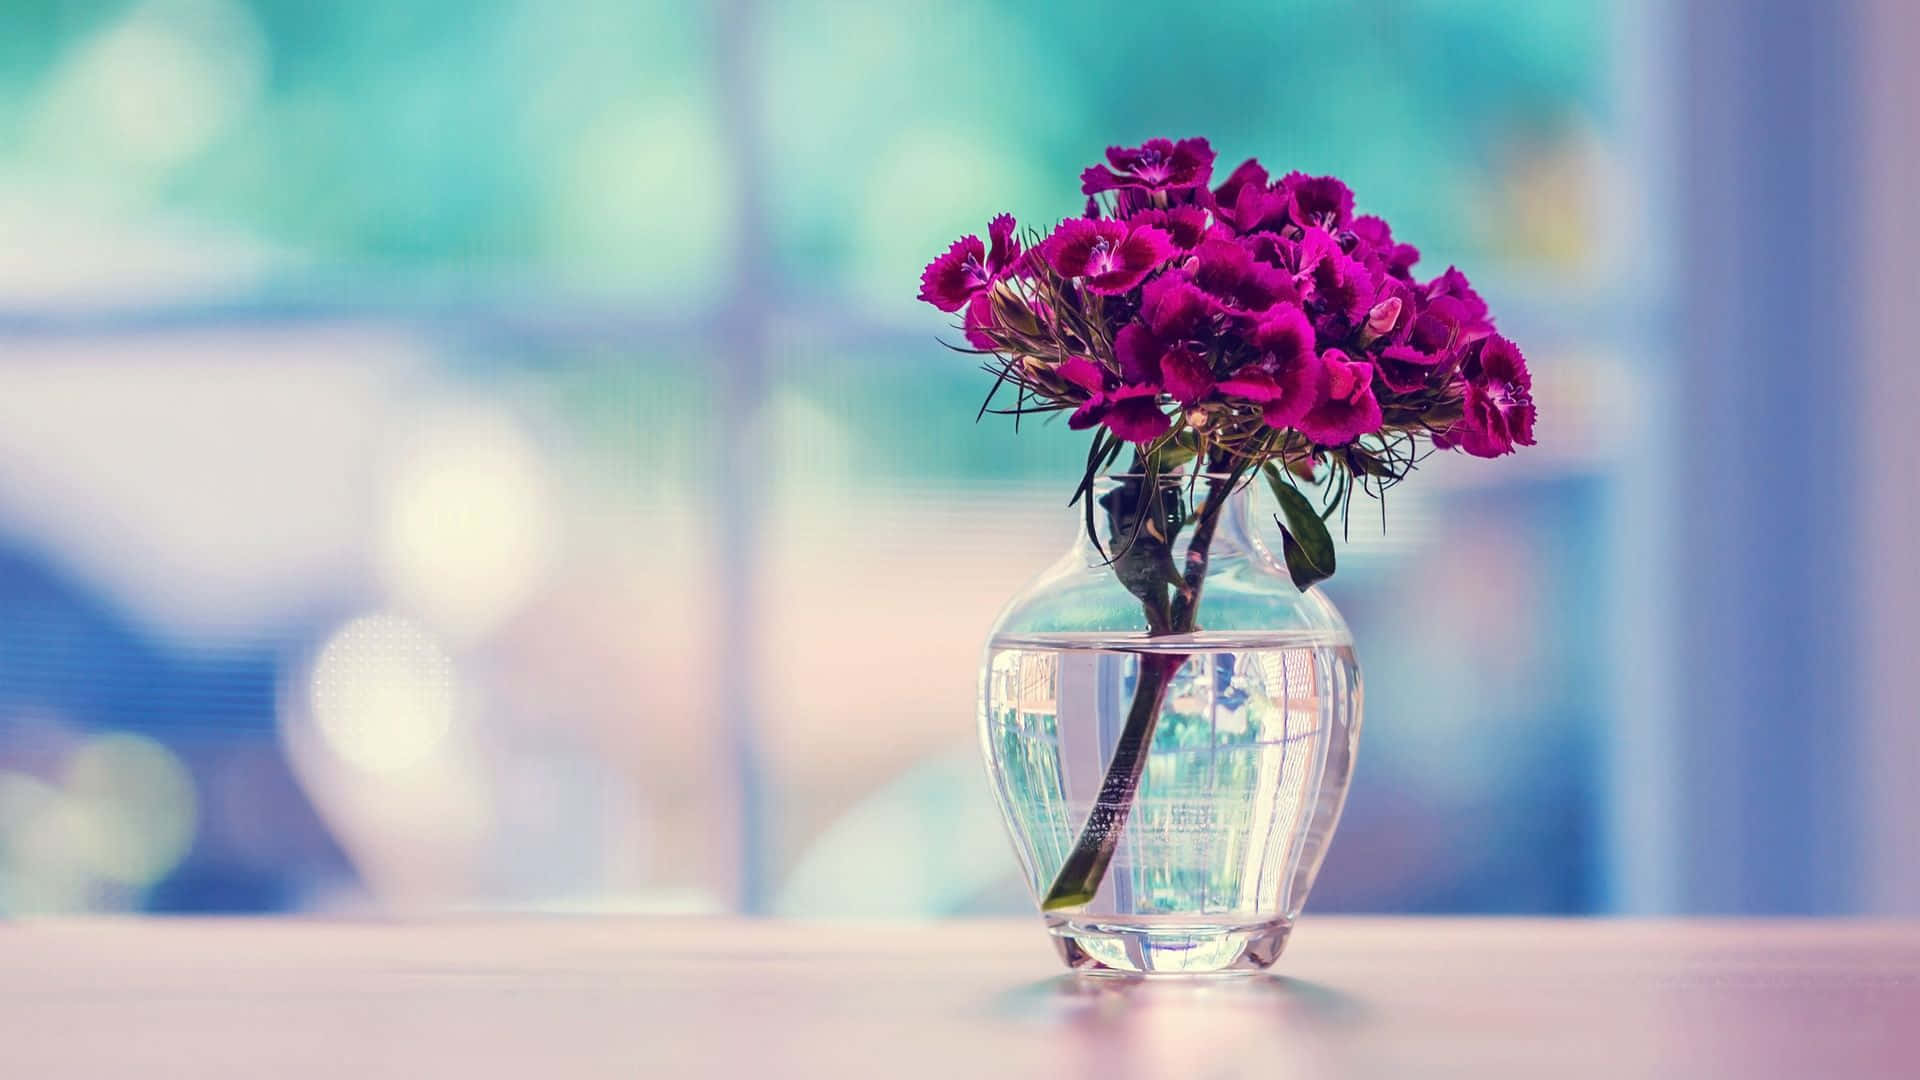 Brighten up your day with a beautiful floral desktop background